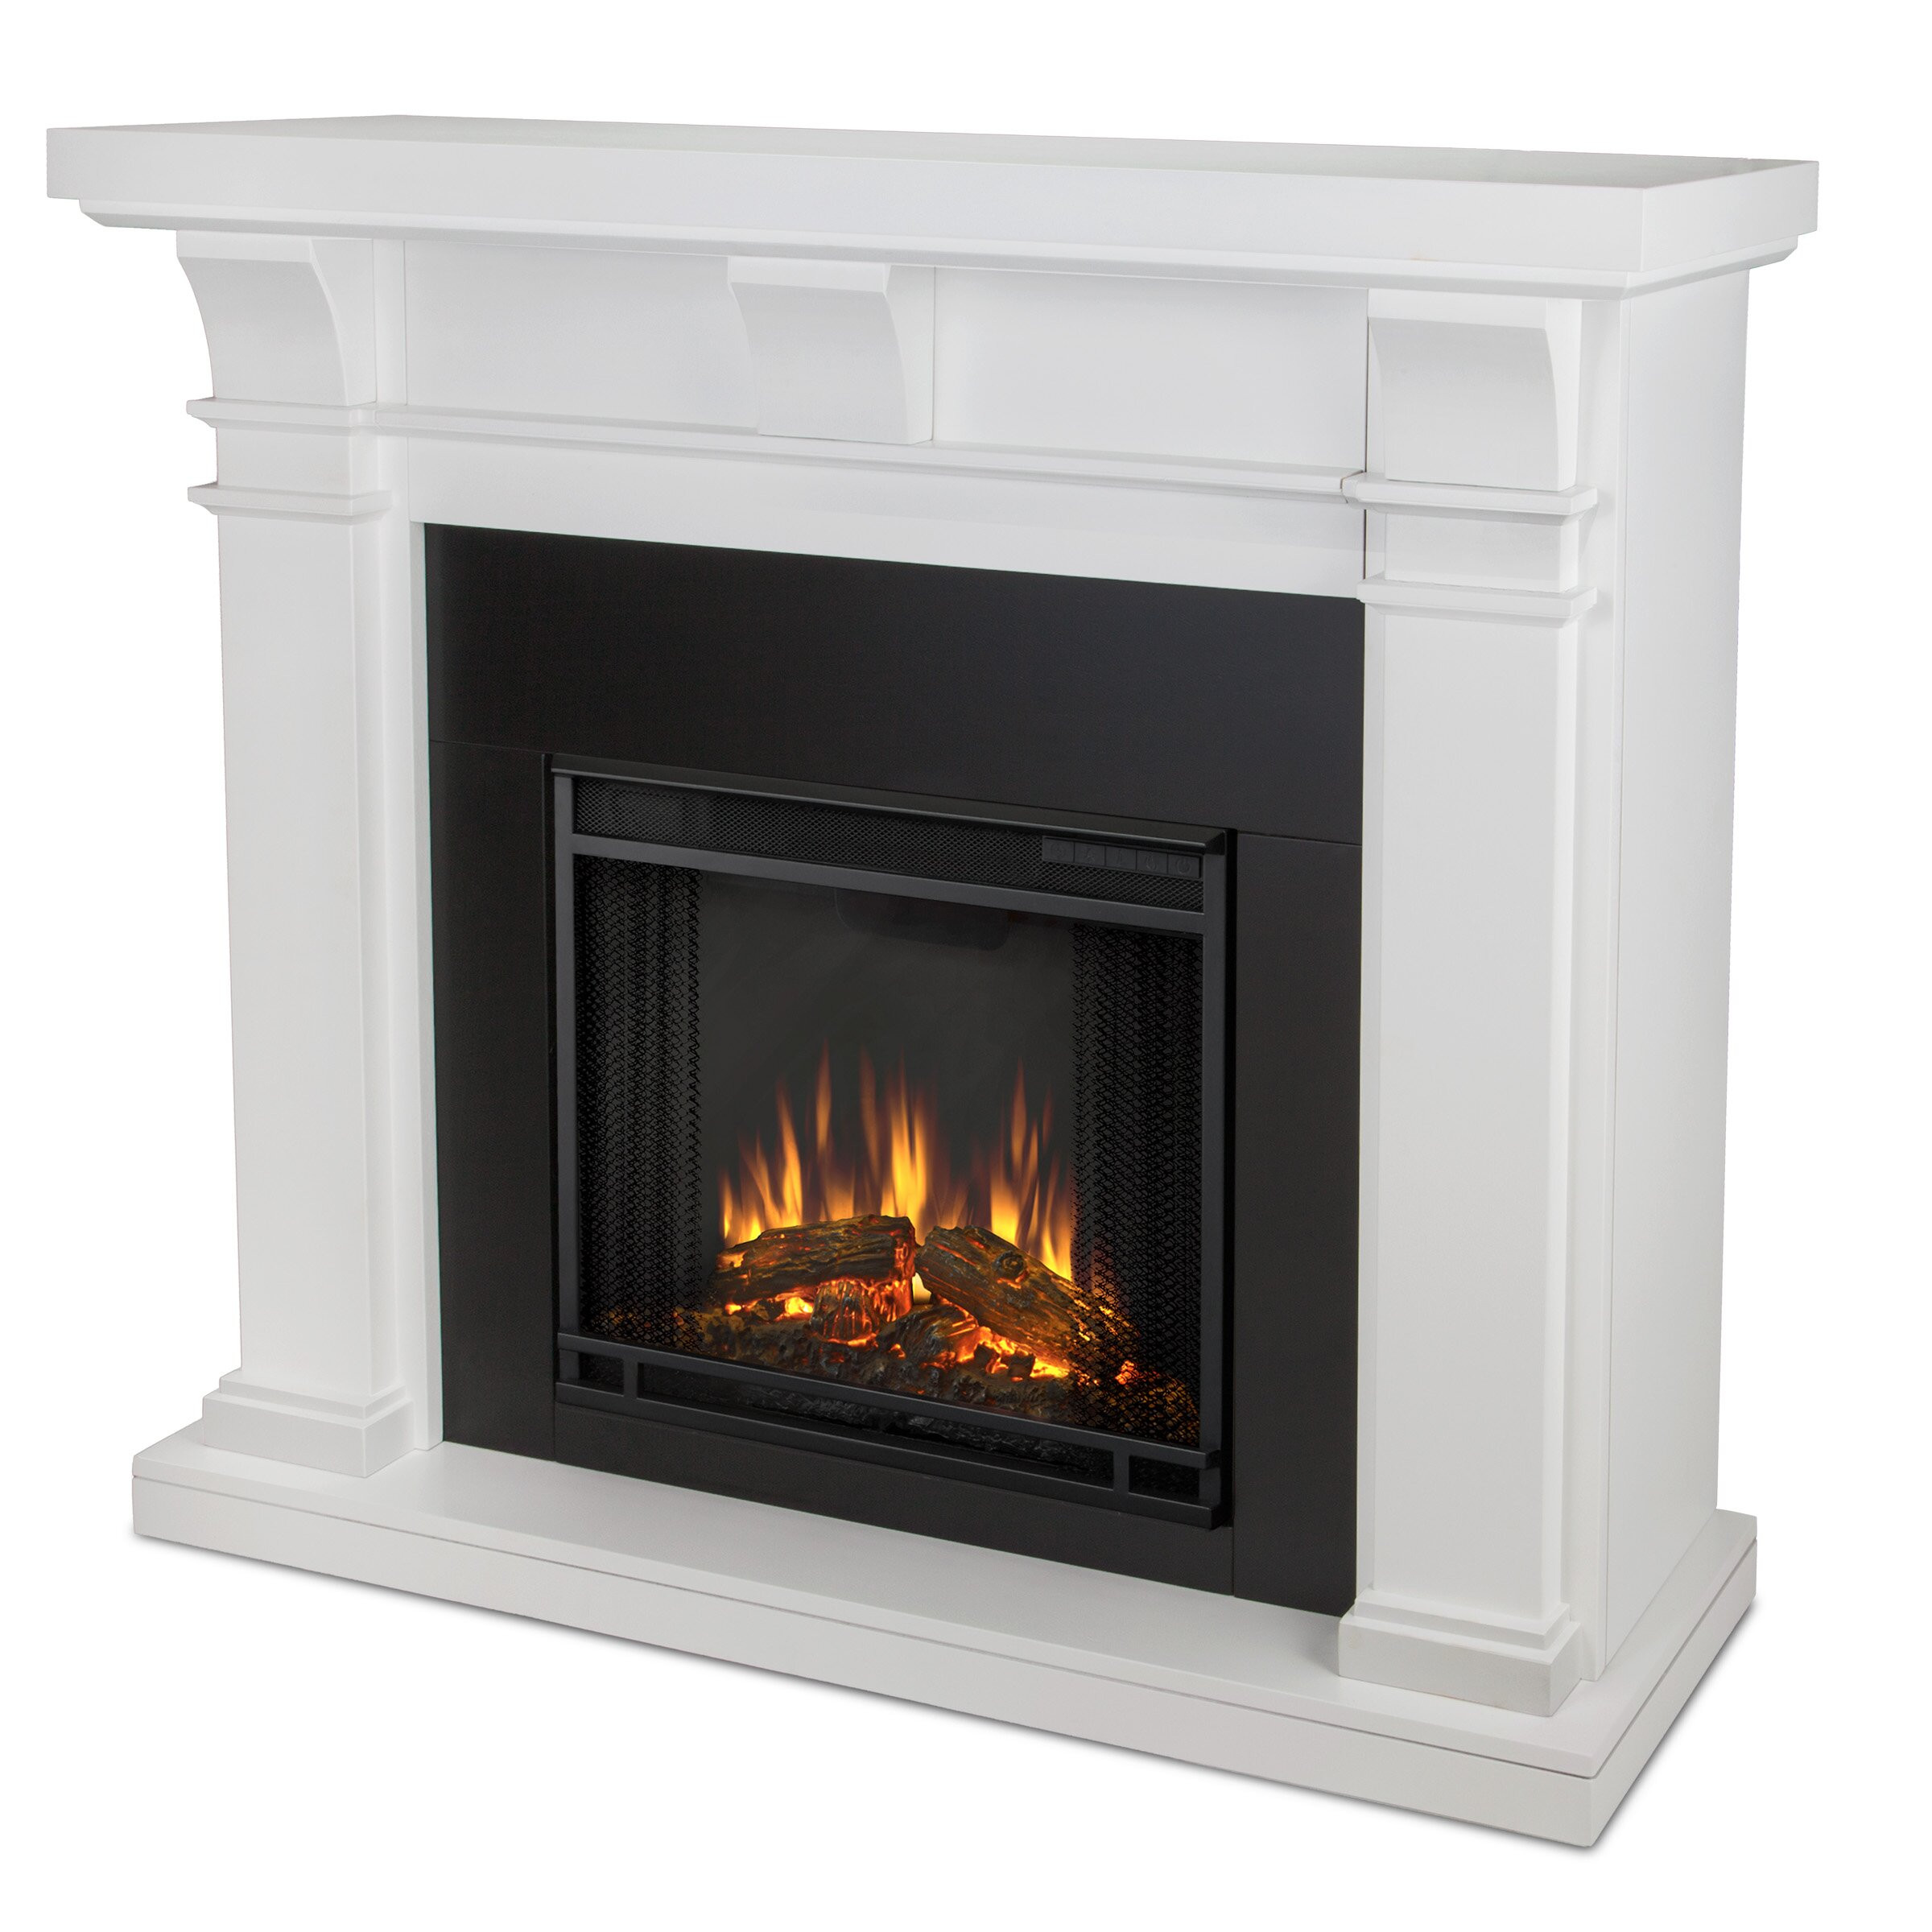 Real Flame Electric Fireplace Reviews
 Real Flame Porter Electric Fireplace & Reviews